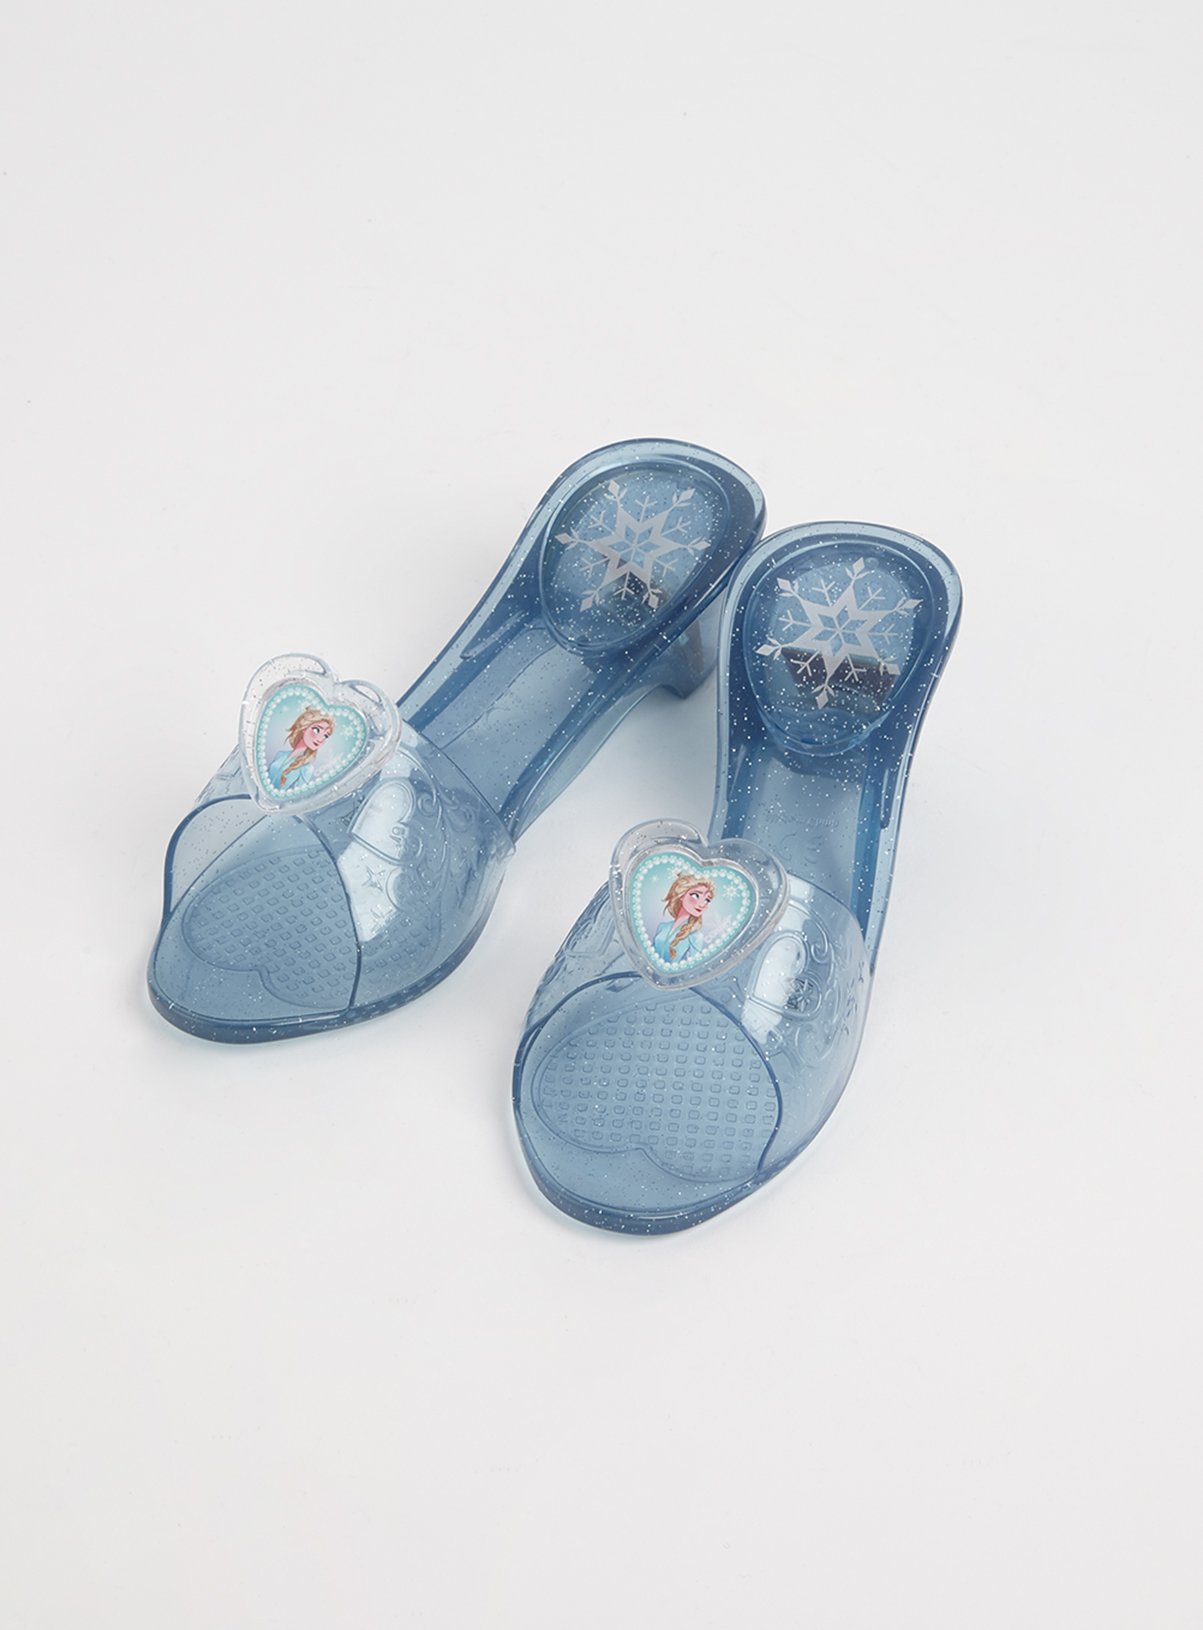 light up jelly shoes